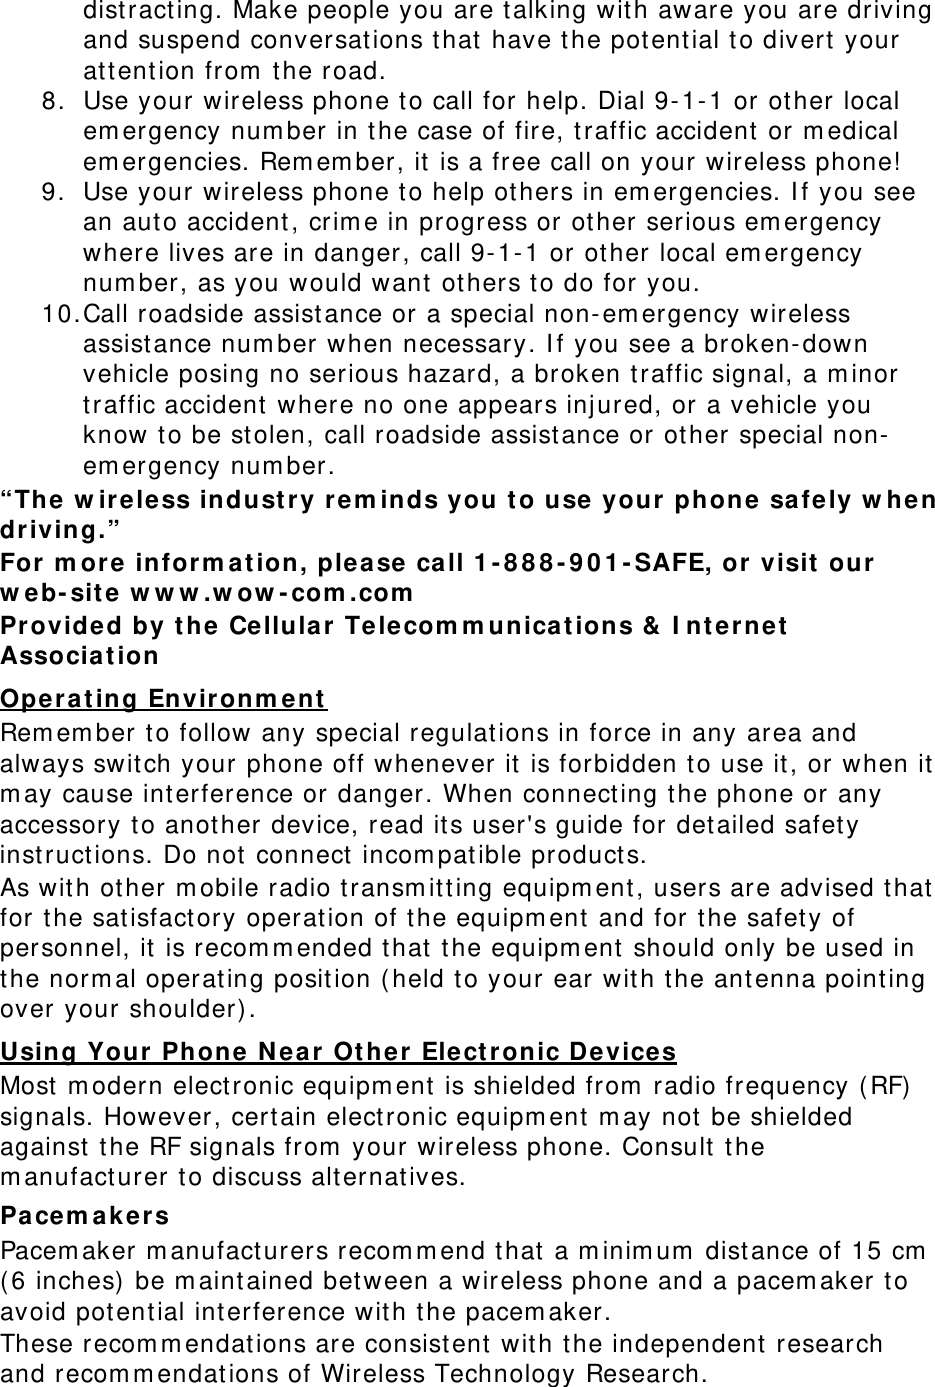 dist ract ing. Make people you are talking with aware you are driving and suspend conversat ions t hat  have t he pot ent ial to divert  your attent ion from  the r oad. 8. Use your wireless phone to call for help. Dial 9- 1- 1 or ot her local em ergency num ber in t he case of fire, t raffic accident  or m edical em ergencies. Rem em ber, it  is a free call on your wireless phone!  9. Use your wireless phone t o help ot hers in em ergencies. I f you see an auto accident , crim e in progress or ot her serious em ergency where lives are in danger, call 9- 1- 1 or other local em ergency num ber, as you would want ot hers to do for you. 10. Call roadside assist ance or a special non-em ergency wireless assistance num ber when necessary. I f you see a broken-down vehicle posing no serious hazard, a broken t raffic signal, a m inor traffic accident  where no one appears injured, or a vehicle you know to be st olen, call roadside assist ance or ot her special non-em ergency num ber. “The w ire less indust r y rem inds you  t o use your  ph on e sa fe ly w he n driving.” For  m or e inform at ion, ple a se call 1 -888-901- SAFE, or  visit  our  w eb-sit e w w w .w ow -com .com  Provided by t he  Cellula r  Te lecom m unica t ions &amp;  I nt er ne t  Associa t ion Rem em ber t o follow any special regulations in force in any area and always swit ch your phone off w henever it  is forbidden t o use it, or w hen it m ay cause interference or danger. When connect ing the phone or any accessory to another device, read its user&apos;s guide for detailed safety inst ruct ions. Do not  connect  incom pat ible product s. Oper a t ing Envir onm ent  As wit h ot her m obile radio t ransm it t ing equipm ent, users are advised t hat for t he sat isfact ory operat ion of t he equipm ent  and for the safet y of personnel, it  is recom m ended t hat t he equipm ent  should only be used in the norm al operating posit ion ( held to y our ear with t he ant enna pointing over your shoulder ) . Most  m odern elect ronic equipm ent  is shielded from  radio frequency ( RF)  signals. How ever, certain electronic equipm ent  m ay not  be shielded against  t he RF signals from  your wireless phone. Consult  t he m anufact urer to discuss alternat ives. Using Your  Phone N ea r  Ot her  Elect ronic D evices Pa cem a kers Pacem aker m anufact urers recom m end that  a m inim um  dist ance of 15 cm  ( 6 inches)  be m aint ained bet ween a wireless phone and a pacem aker to avoid pot ent ial int erference wit h t he pacem aker. These recom m endat ions are consist ent  with t he independent resear ch and recom m endat ions of Wireless Technology Research. 